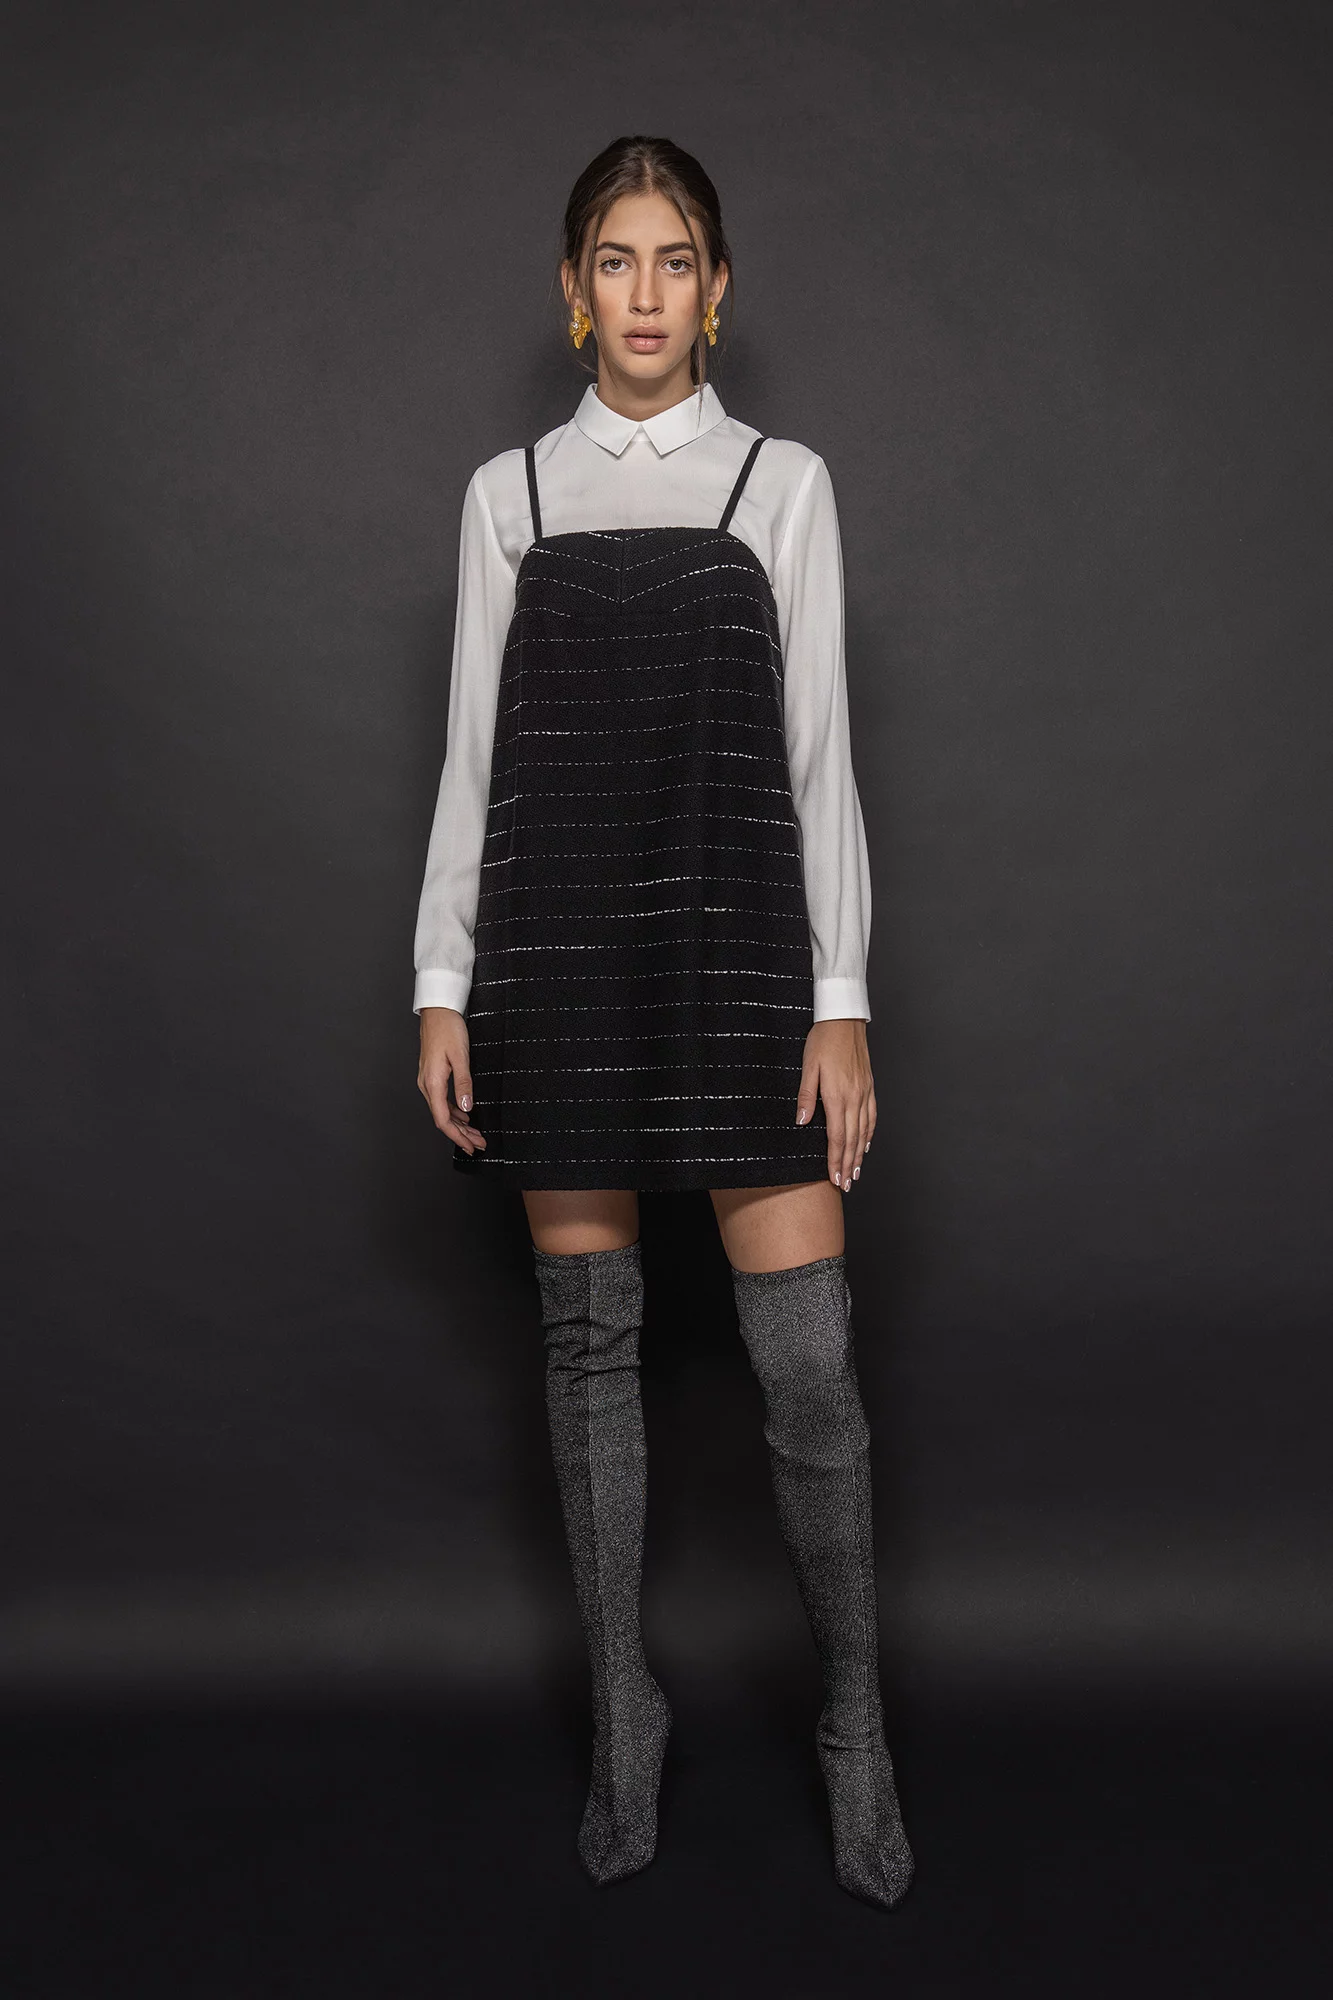 Pinafore type striped dress with thin straps full • Sassa Björg